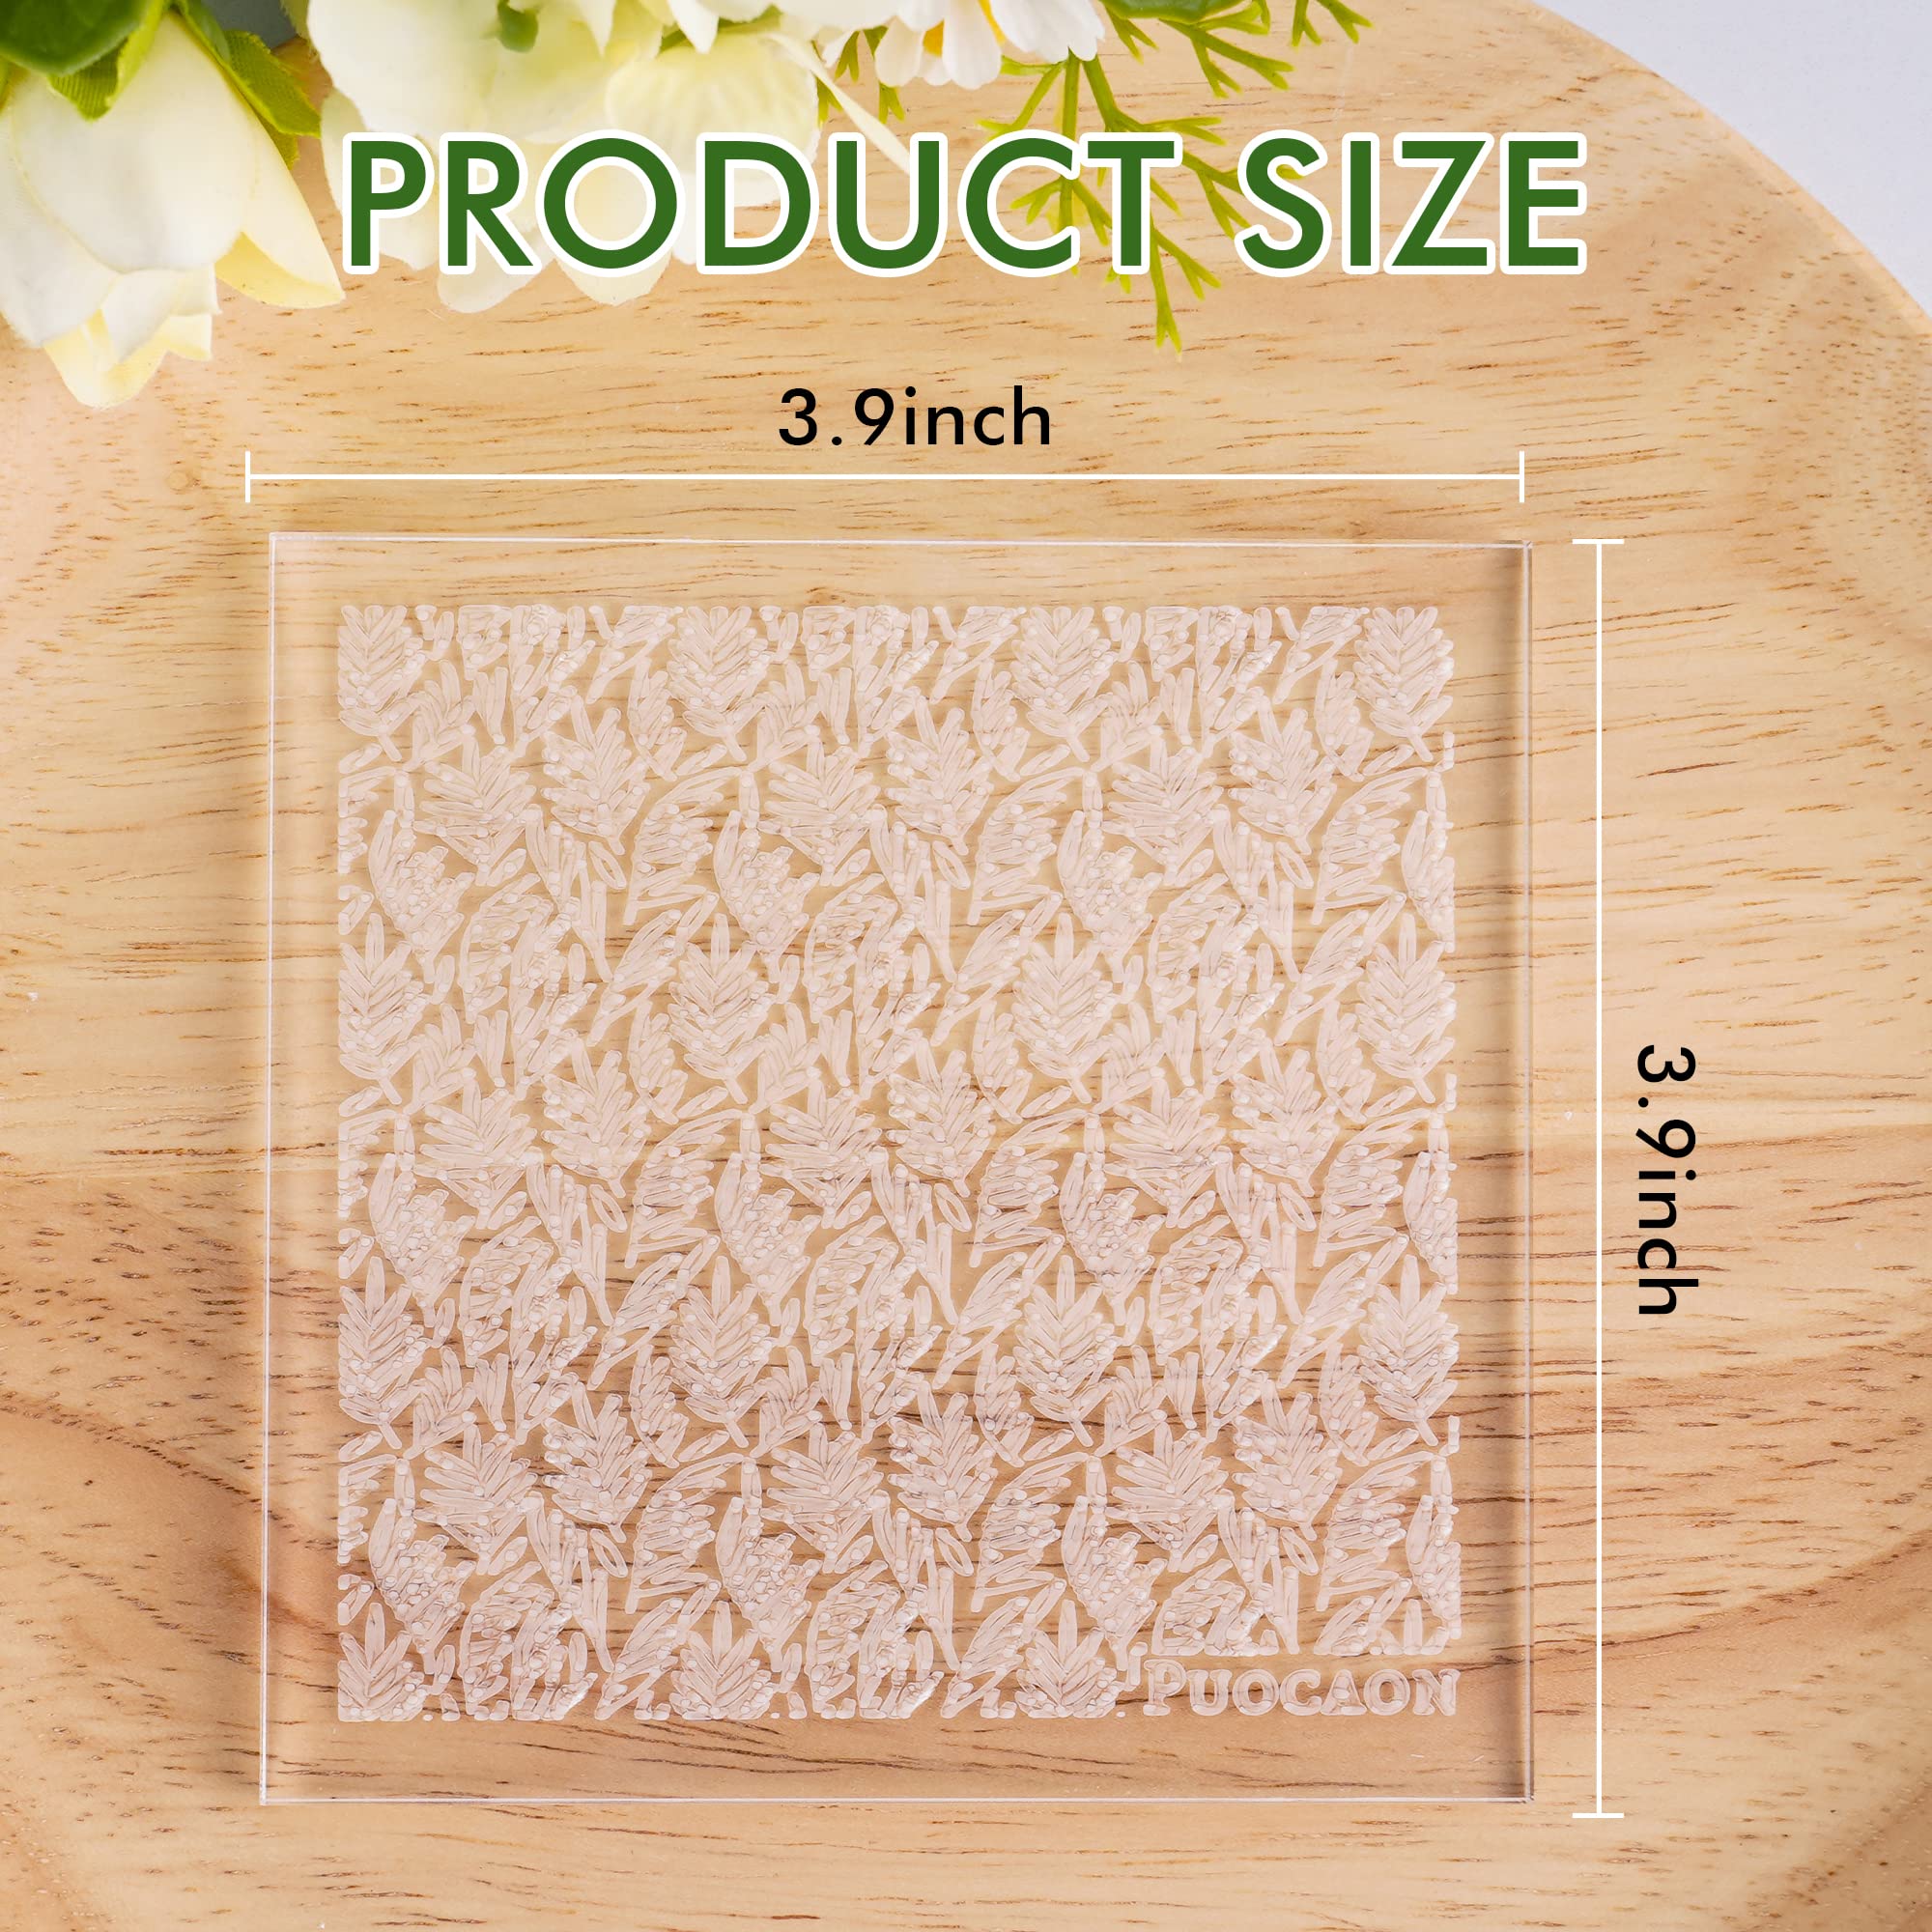  Puocaon Clay Texture Molds for Earrings, 2 Pcs